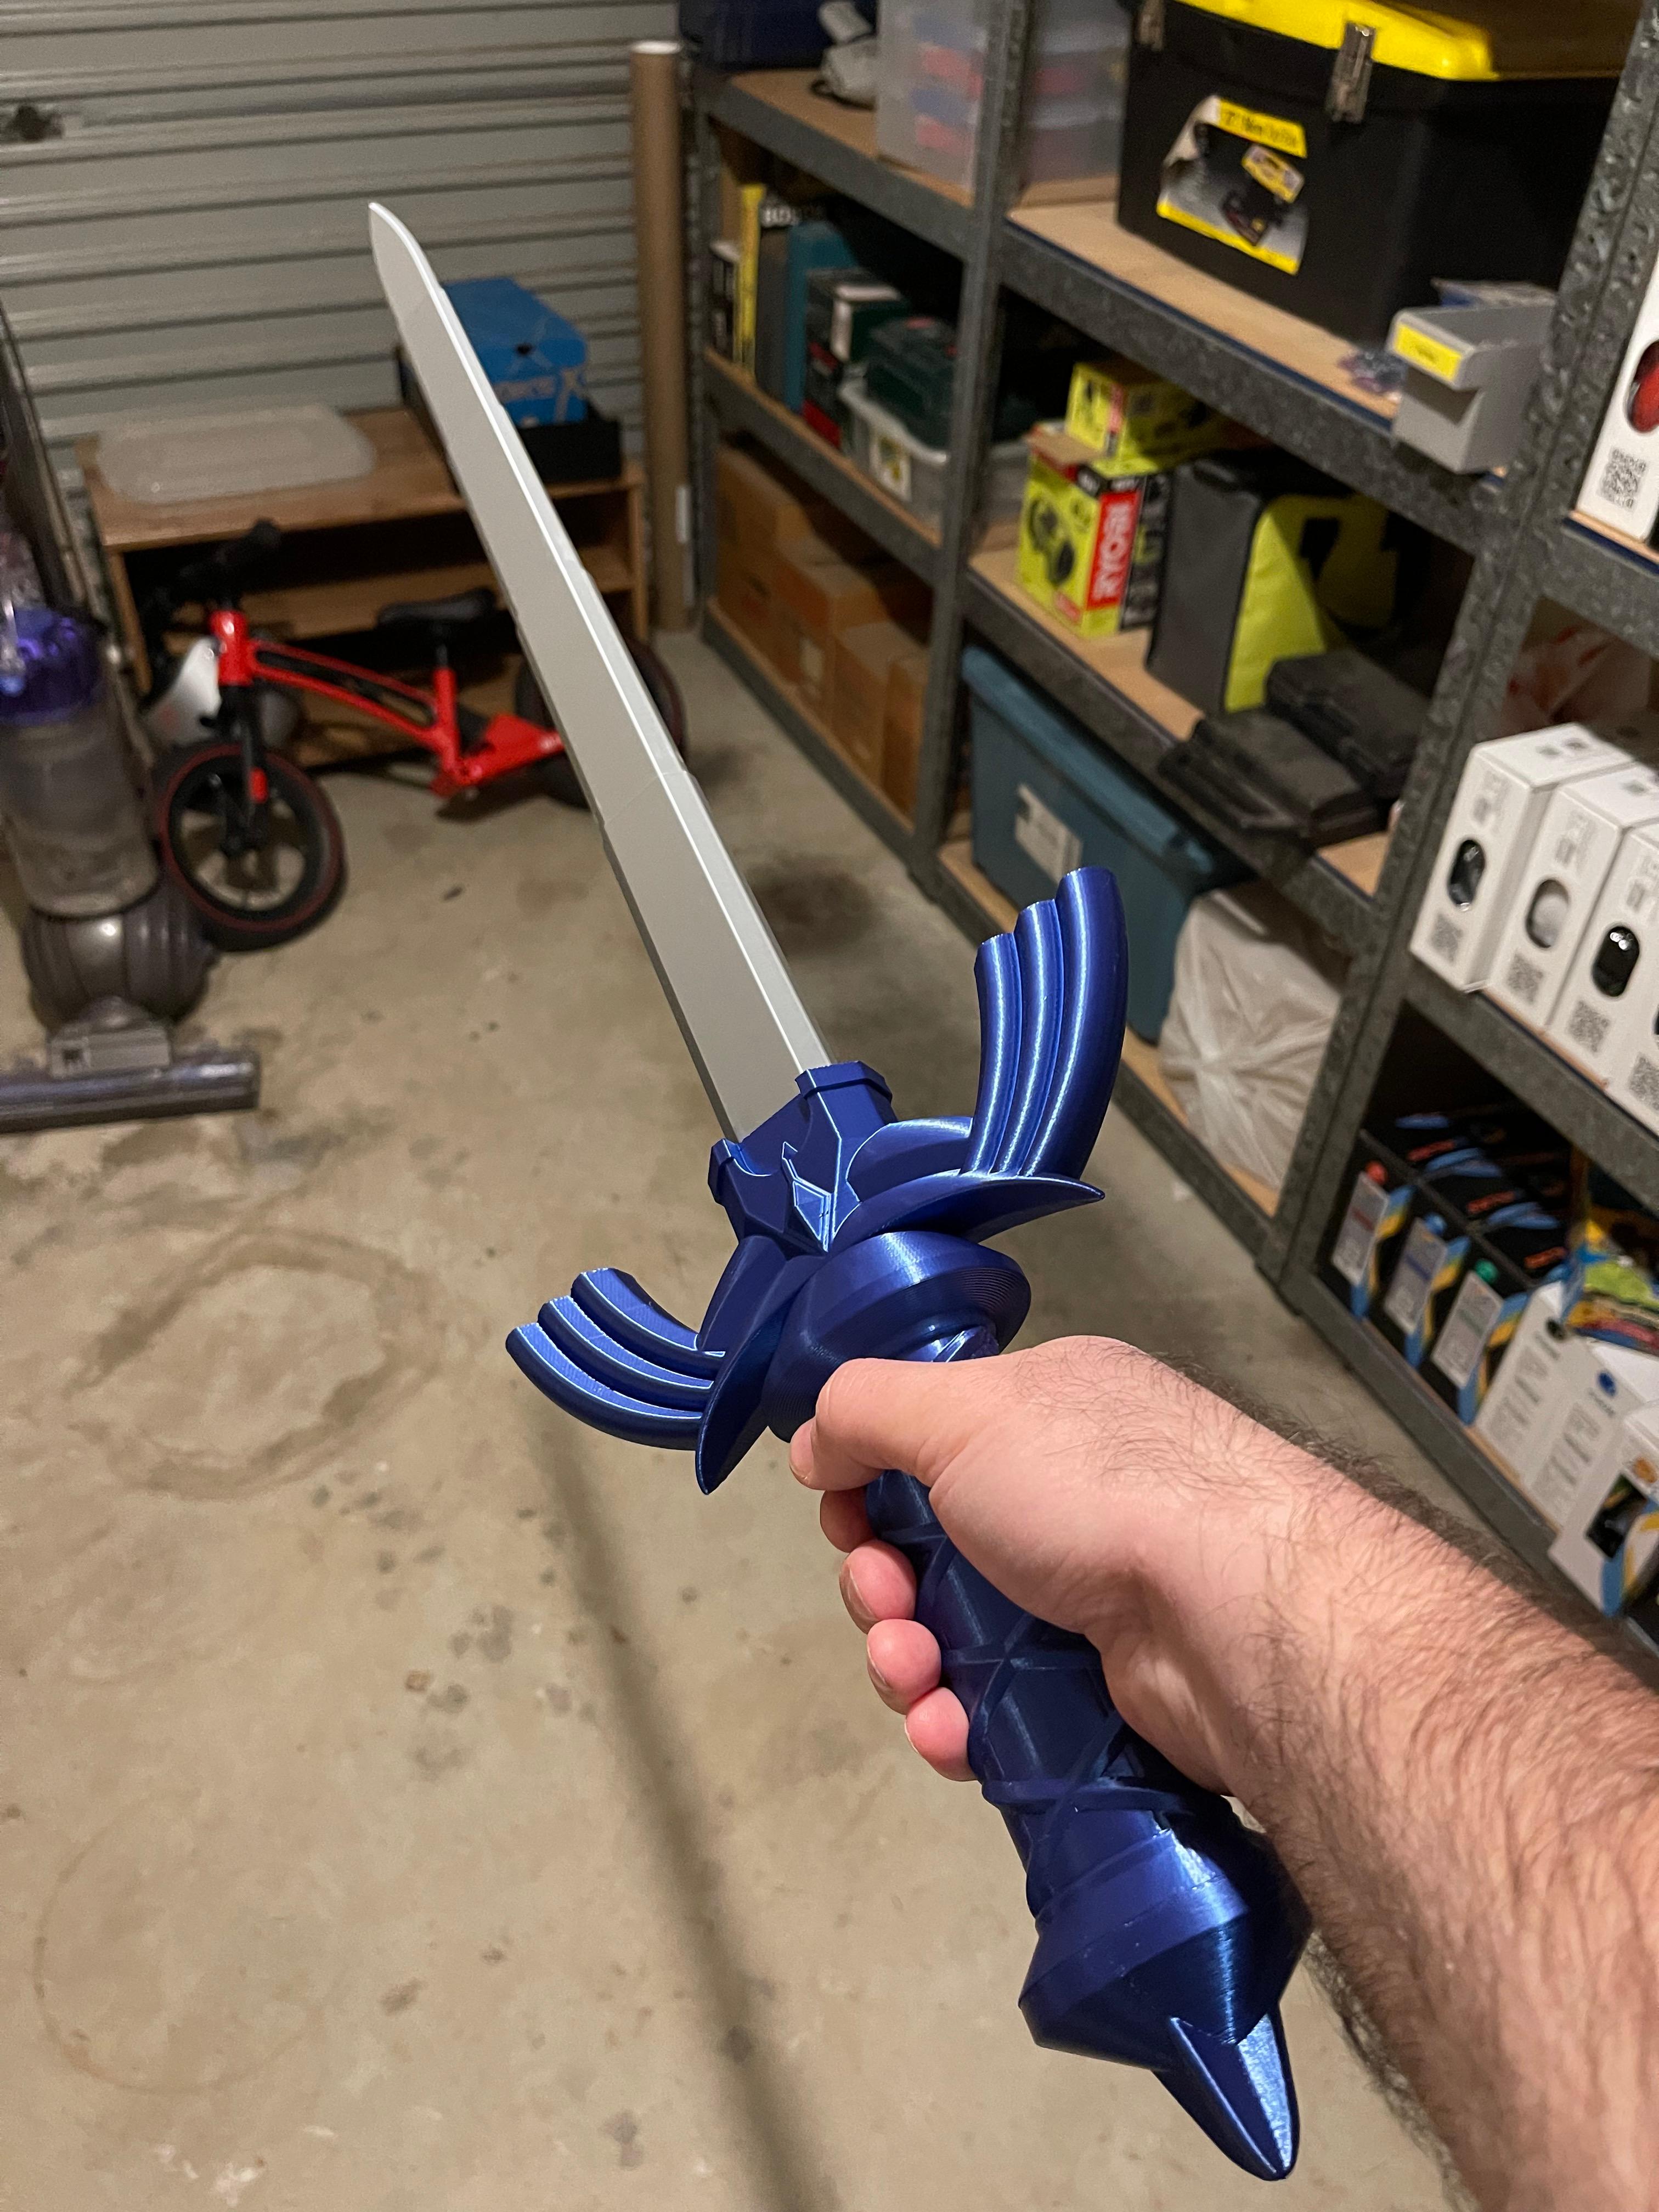 Collapsing Master Sword with Replaceable Blade - Amazing model! Really happy with how the print turned out, using silk blue and silk silver PLA. Had the same issue with the pommel not lining up completely when fully tight, so used a sanding block to carefully sand back the surface until it lined up perfectly. Thanks for your work on this! - 3d model